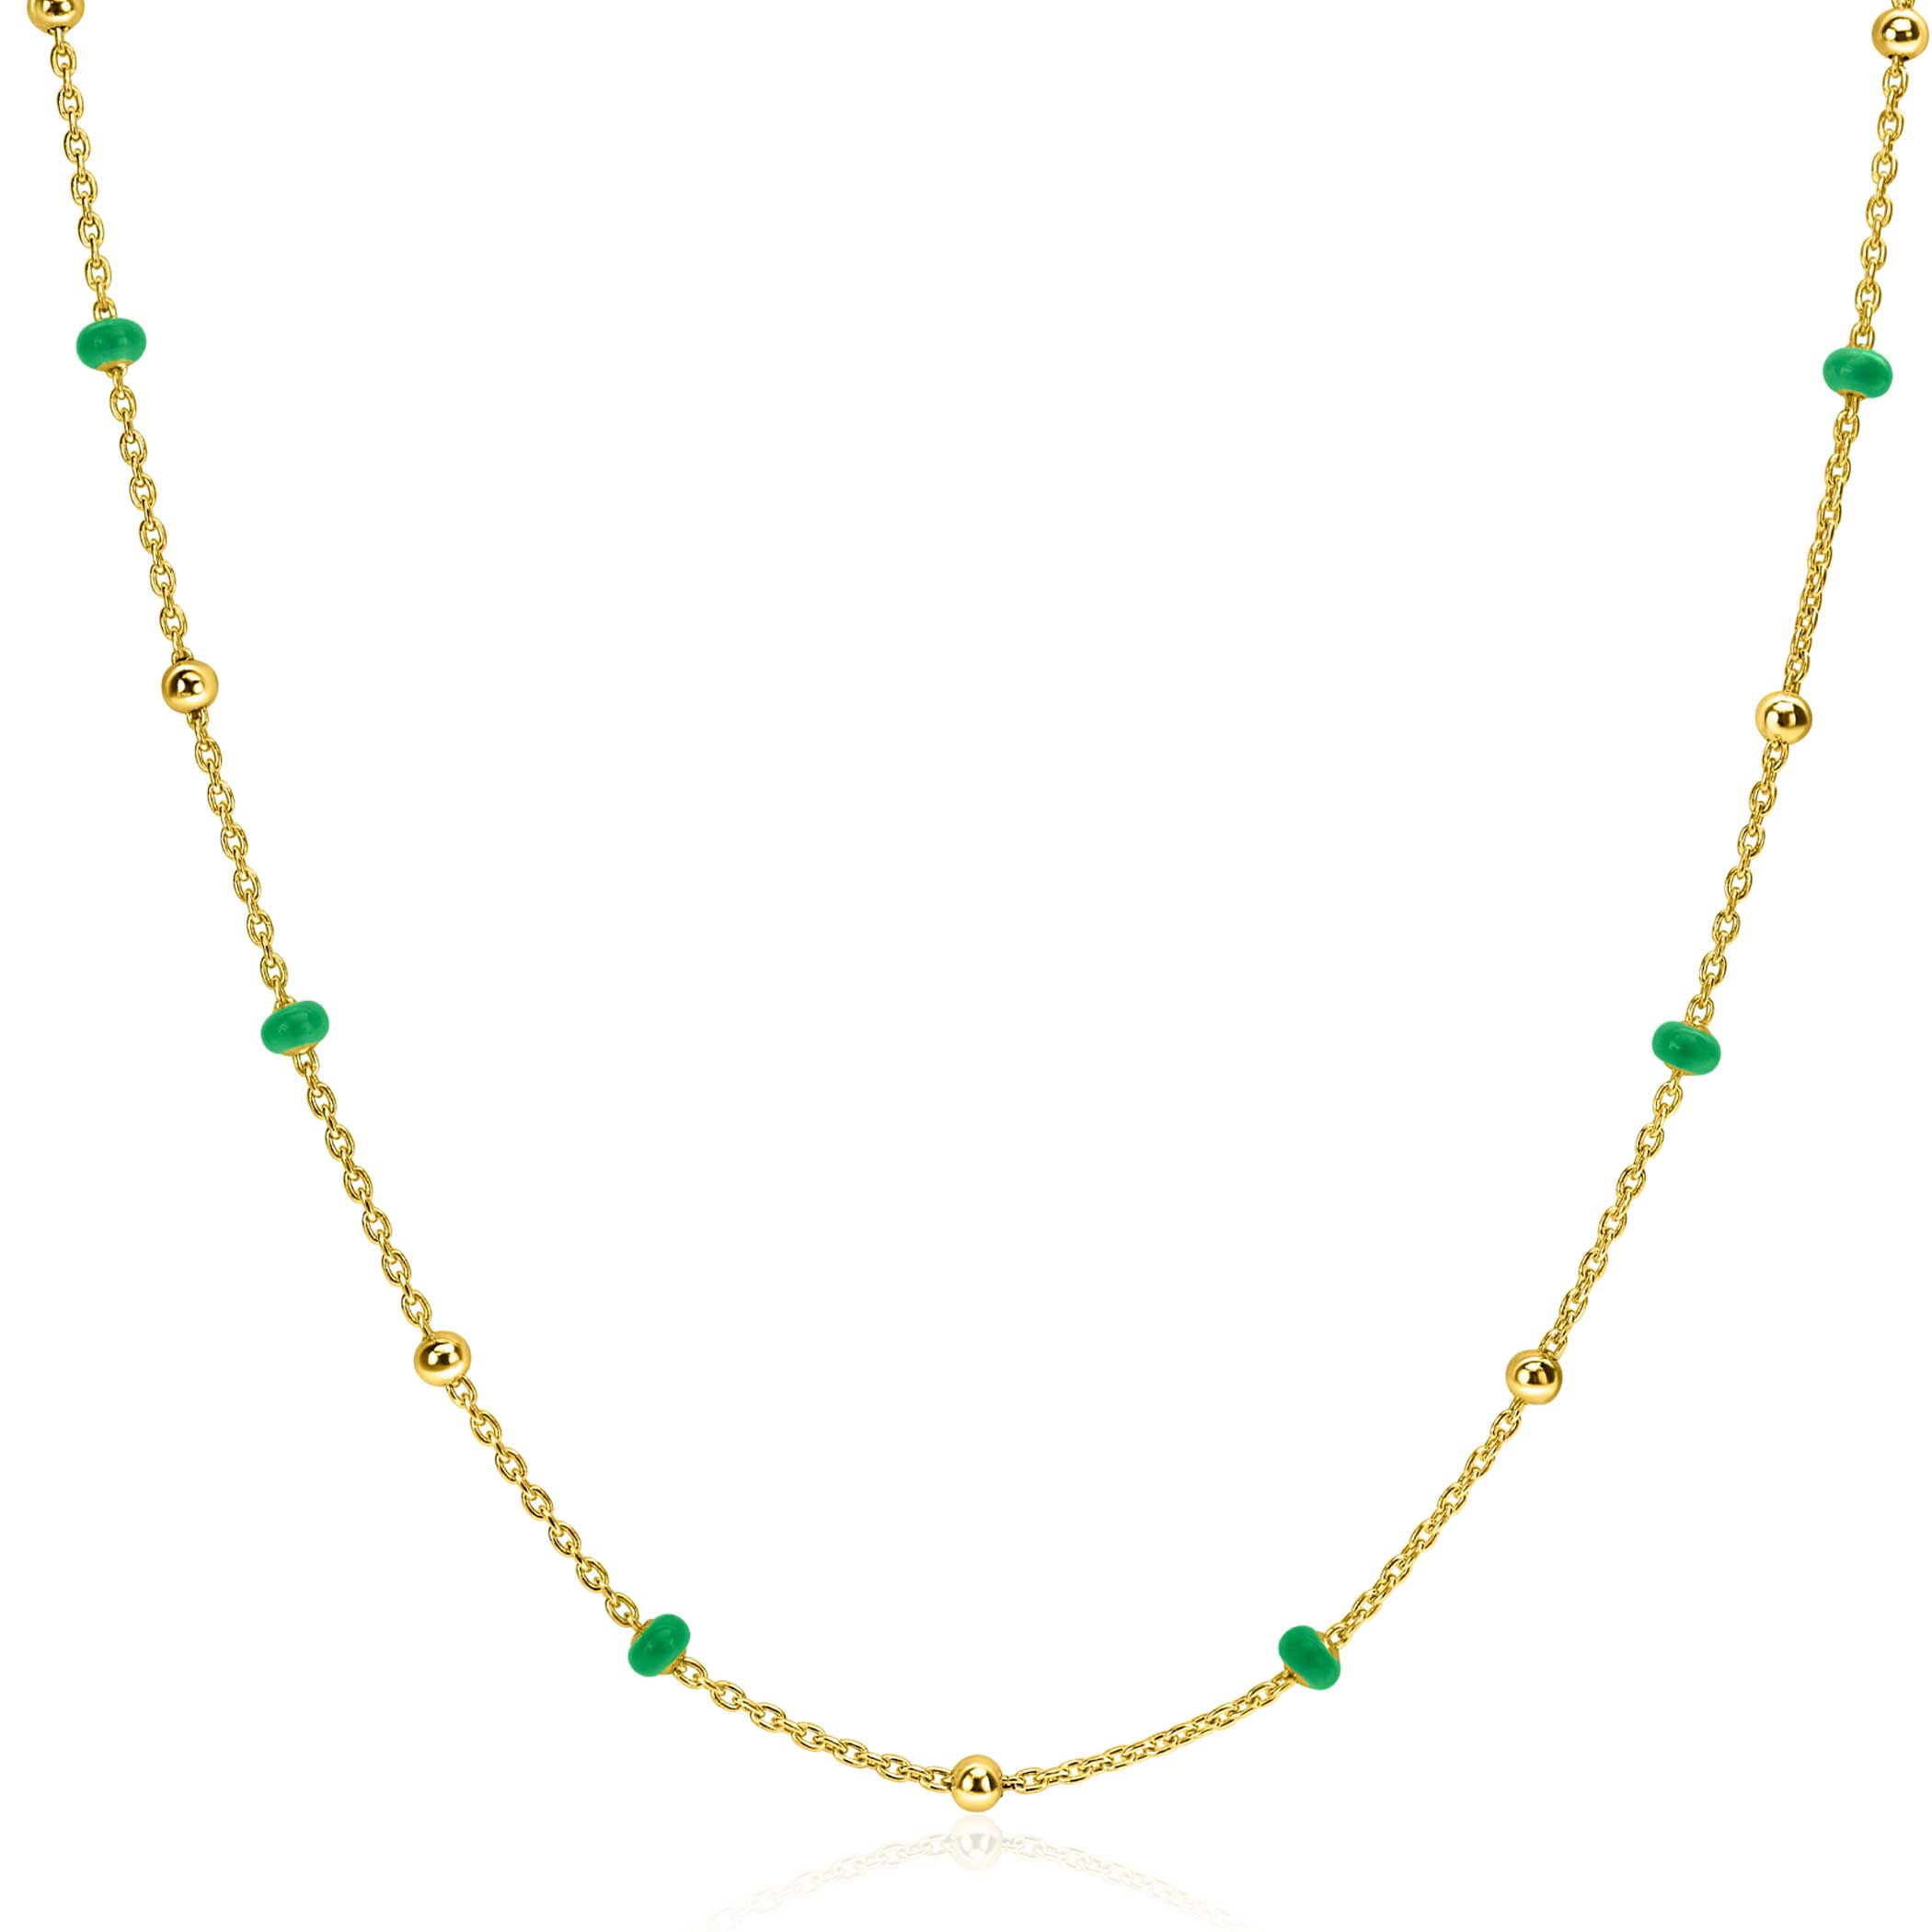 ZINZI Gold Plated Sterling Silver Fantasy Necklace with 13 Green Donuts and Shiny Beads 42-45cm ZIC2509